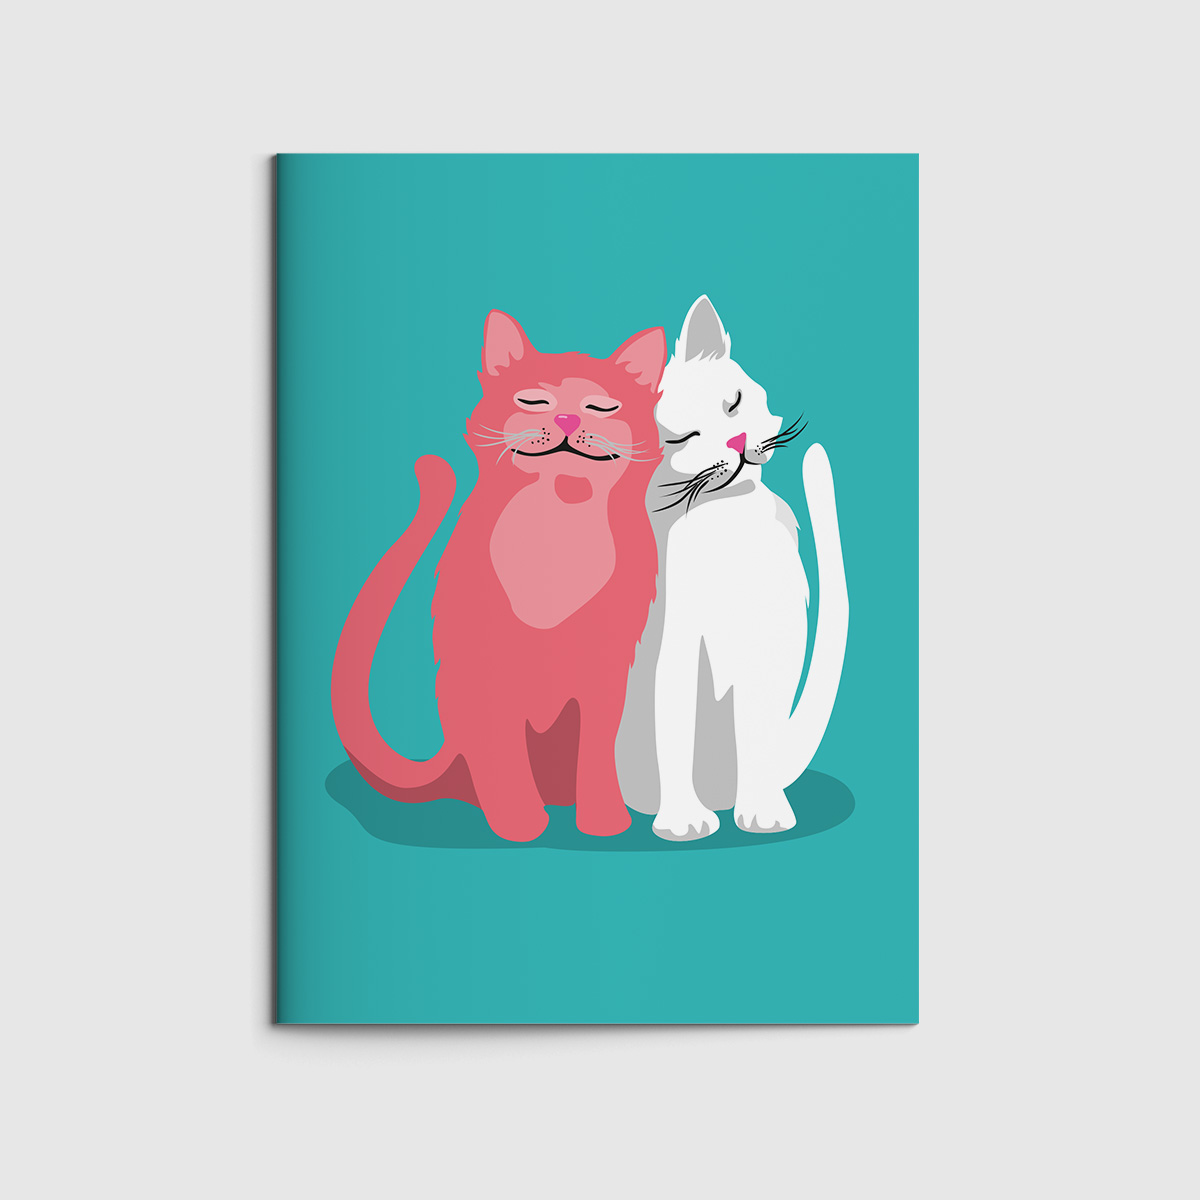 Booklet A6 - neonstyle - Cats